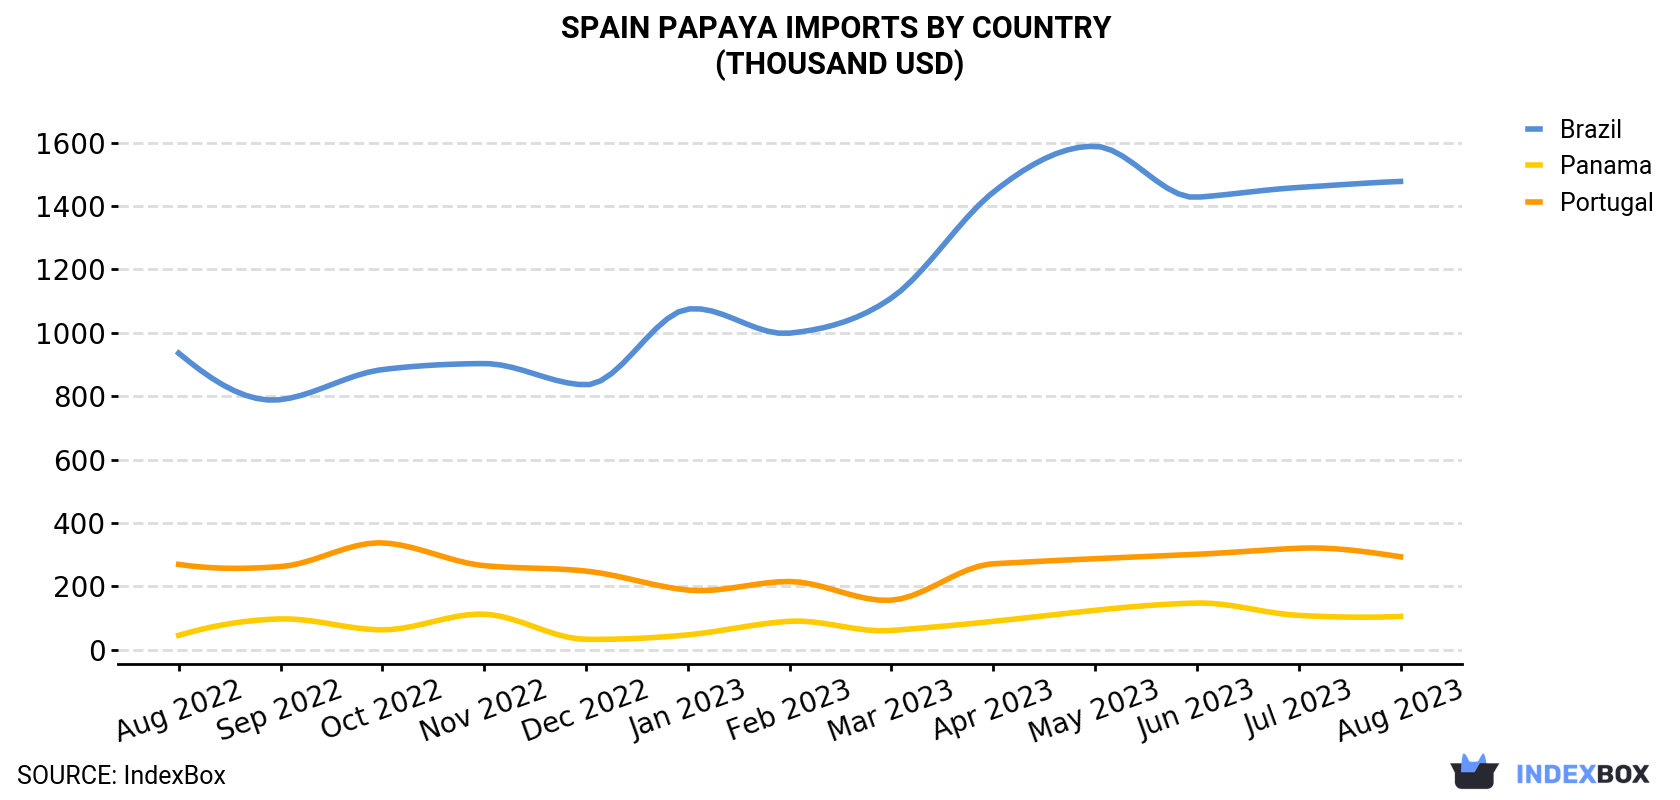 Spain Papaya Imports By Country (Thousand USD)